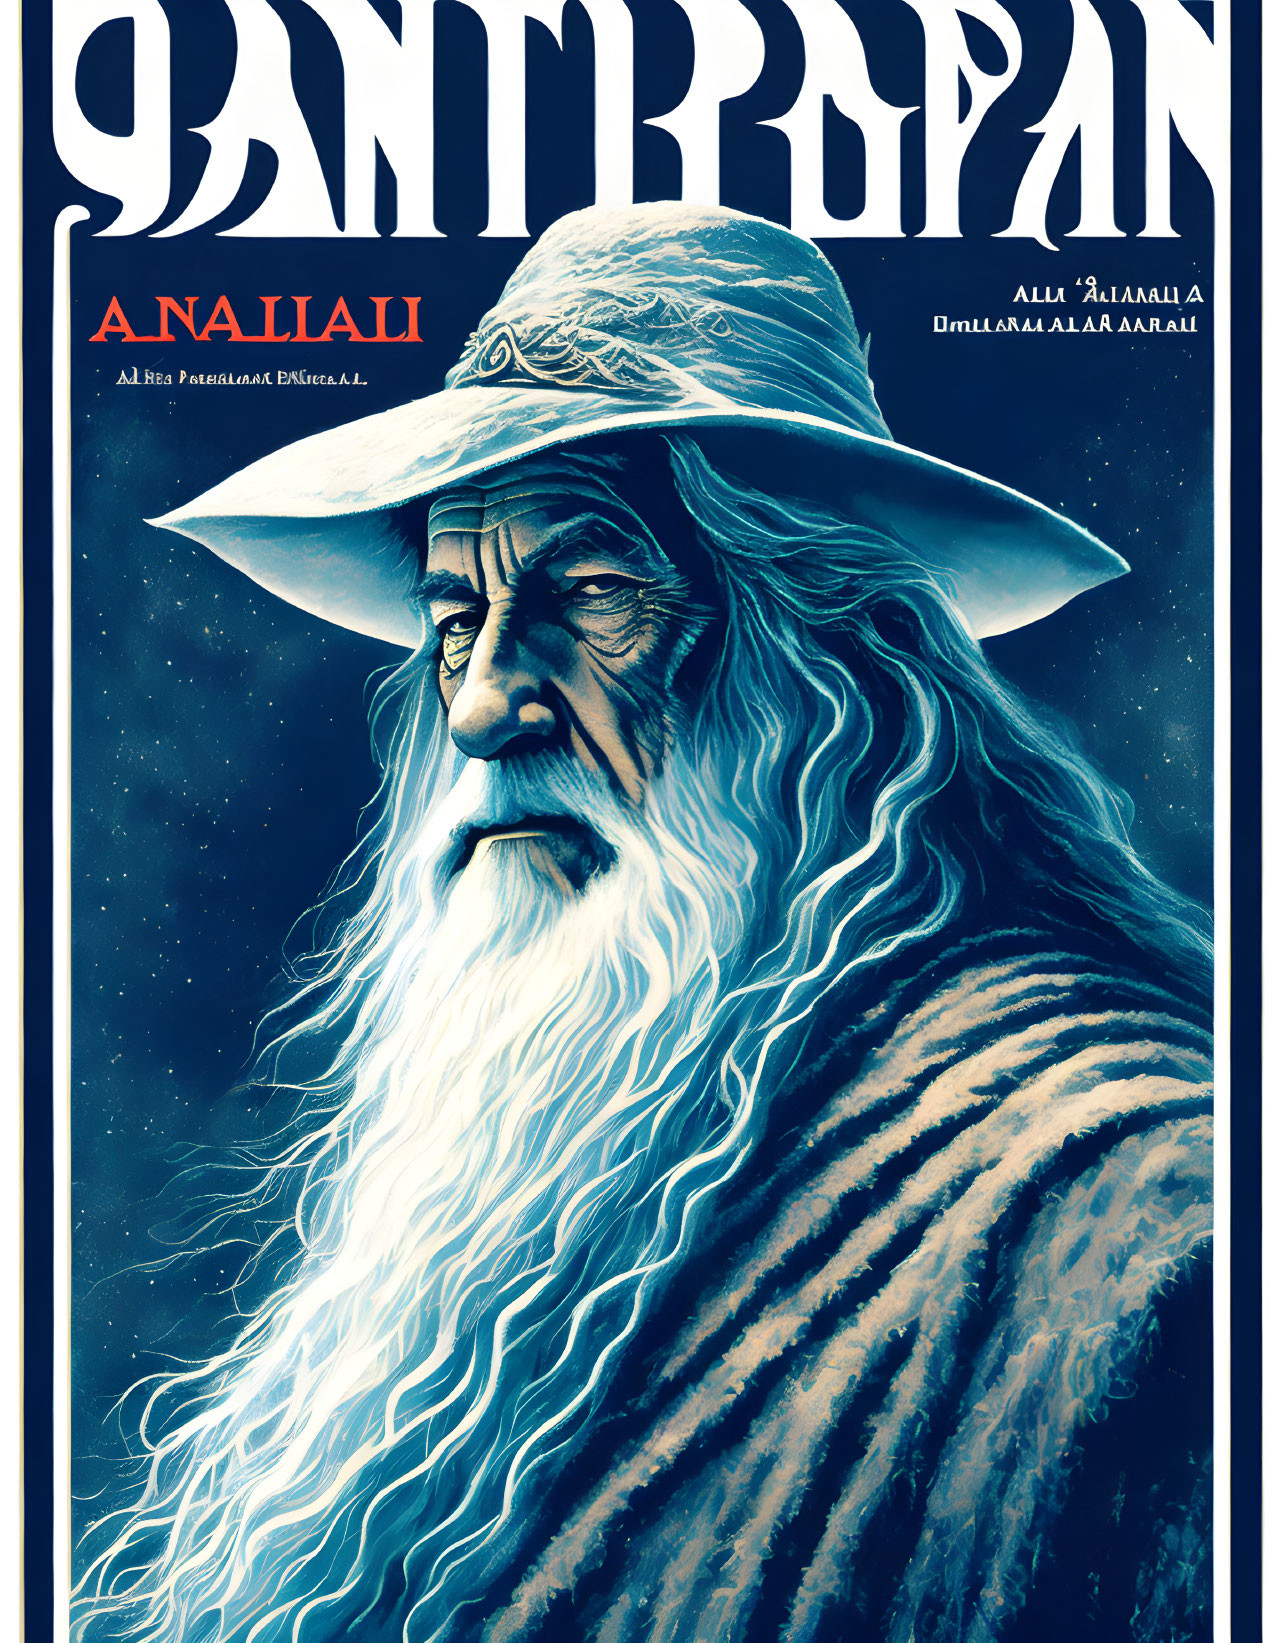 Gandalf for President campaign poster